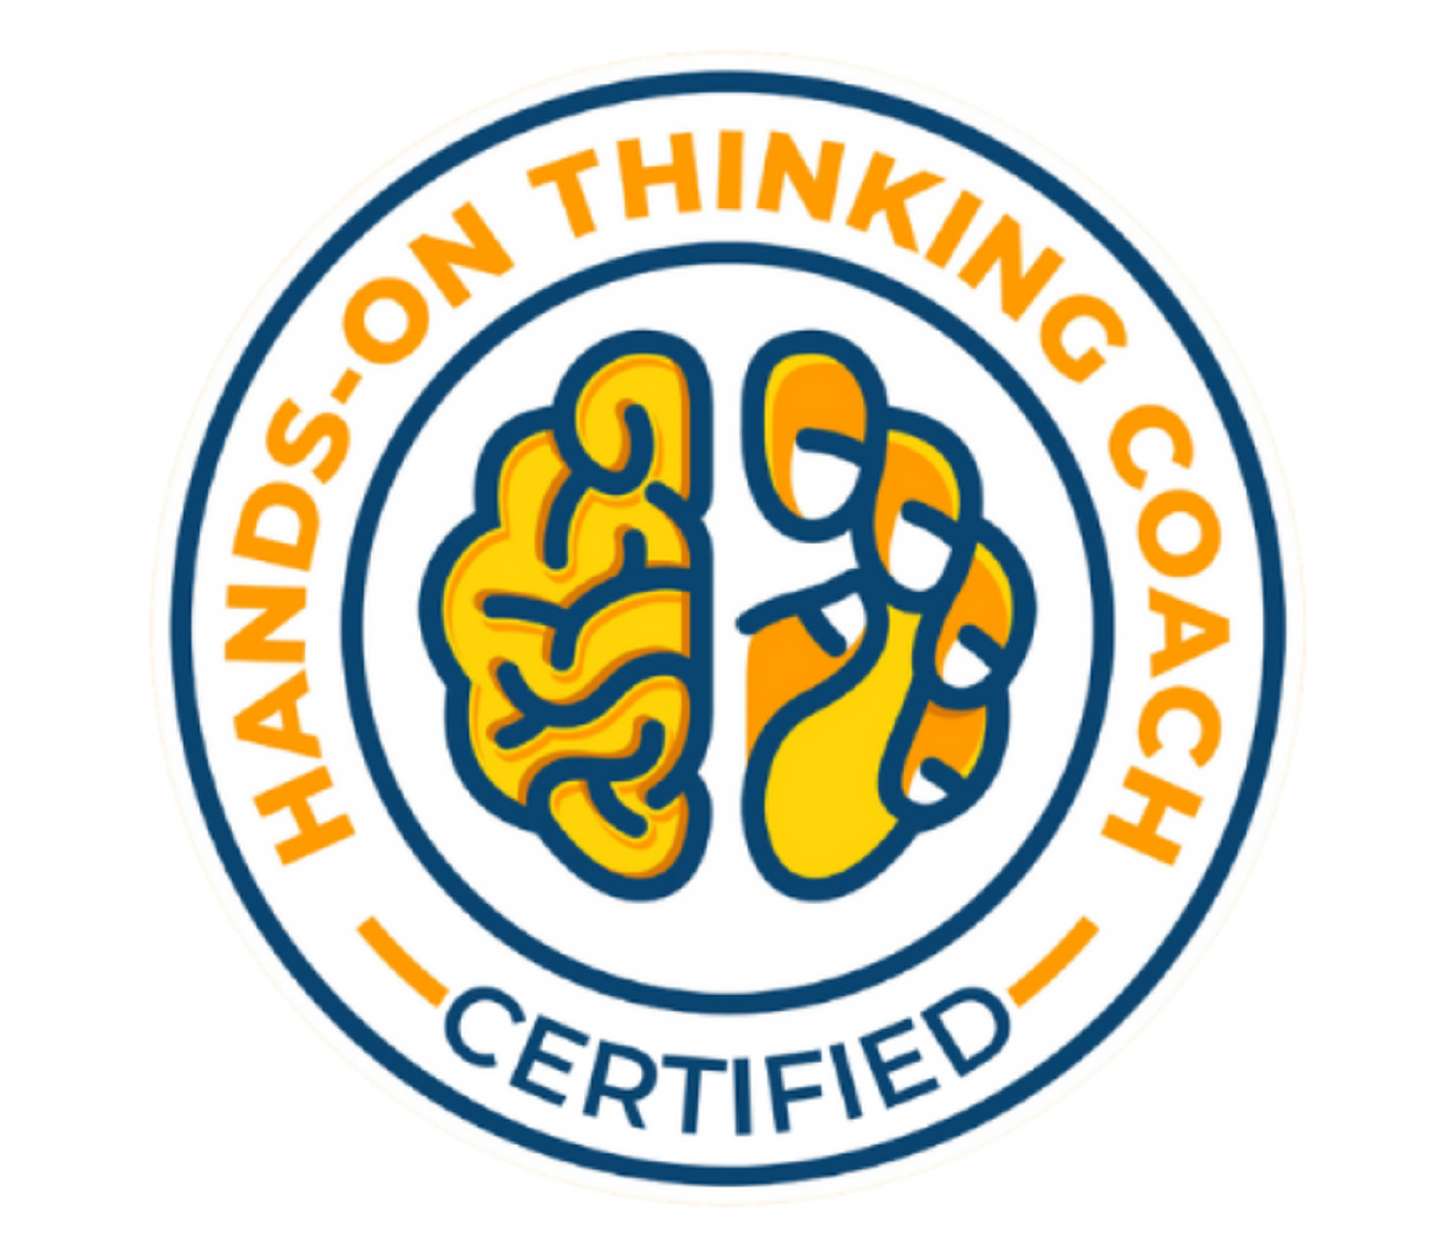 Hands-On Thinking Coach badge